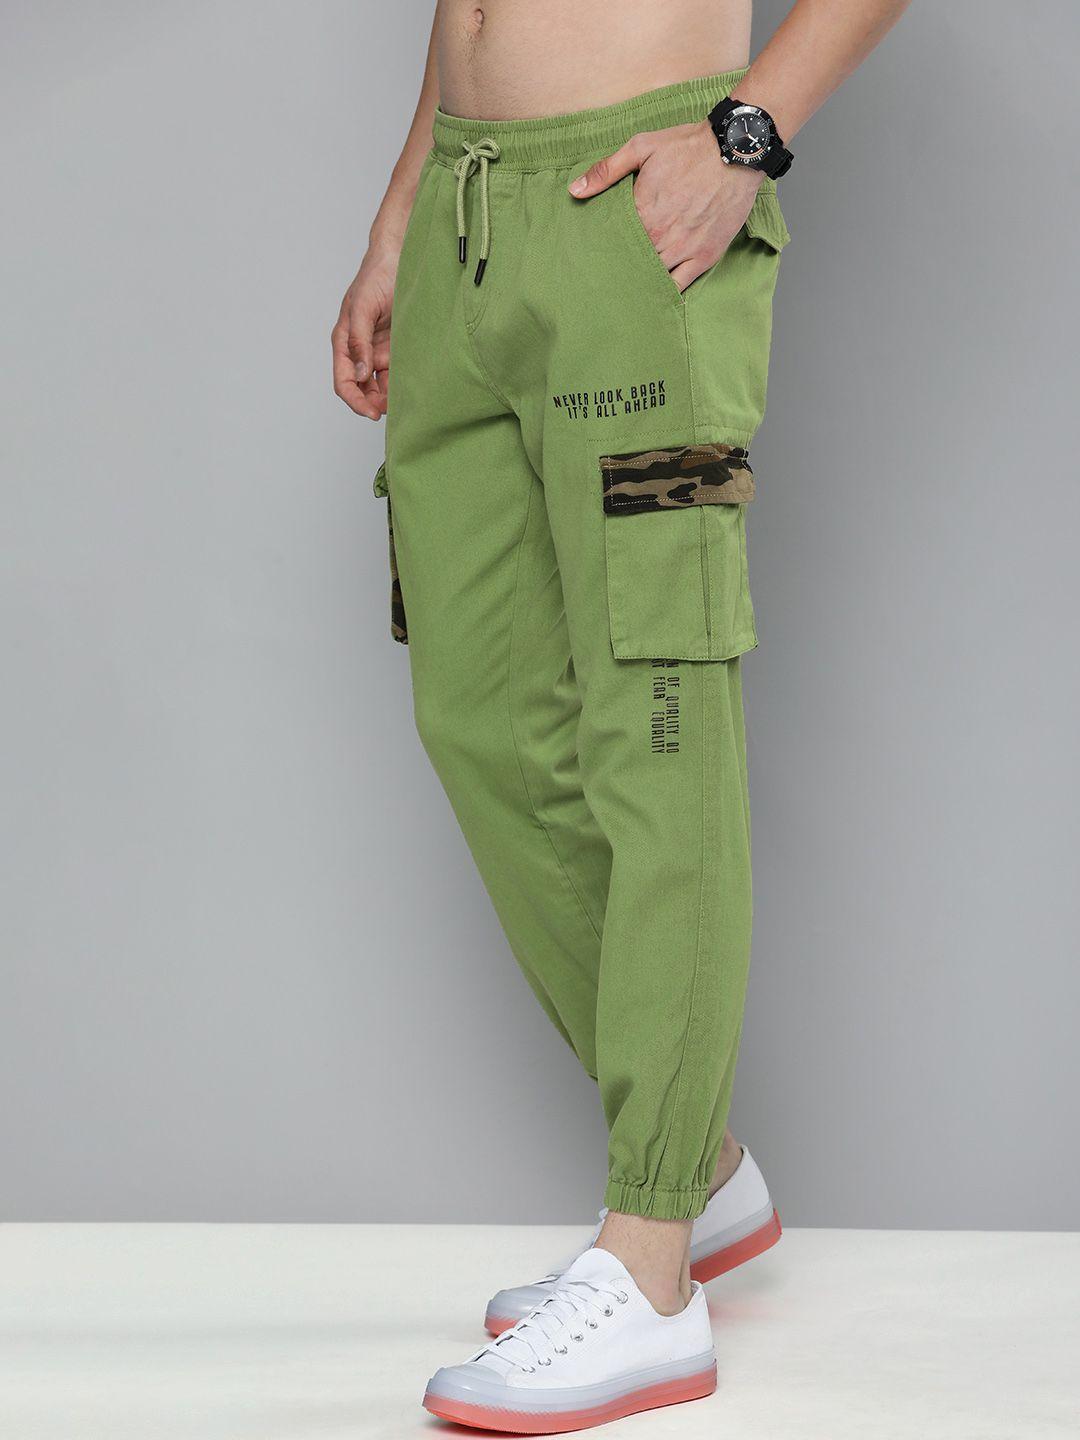 here&now-men-olive-green-solid-warp-pockets-joggers-trousers